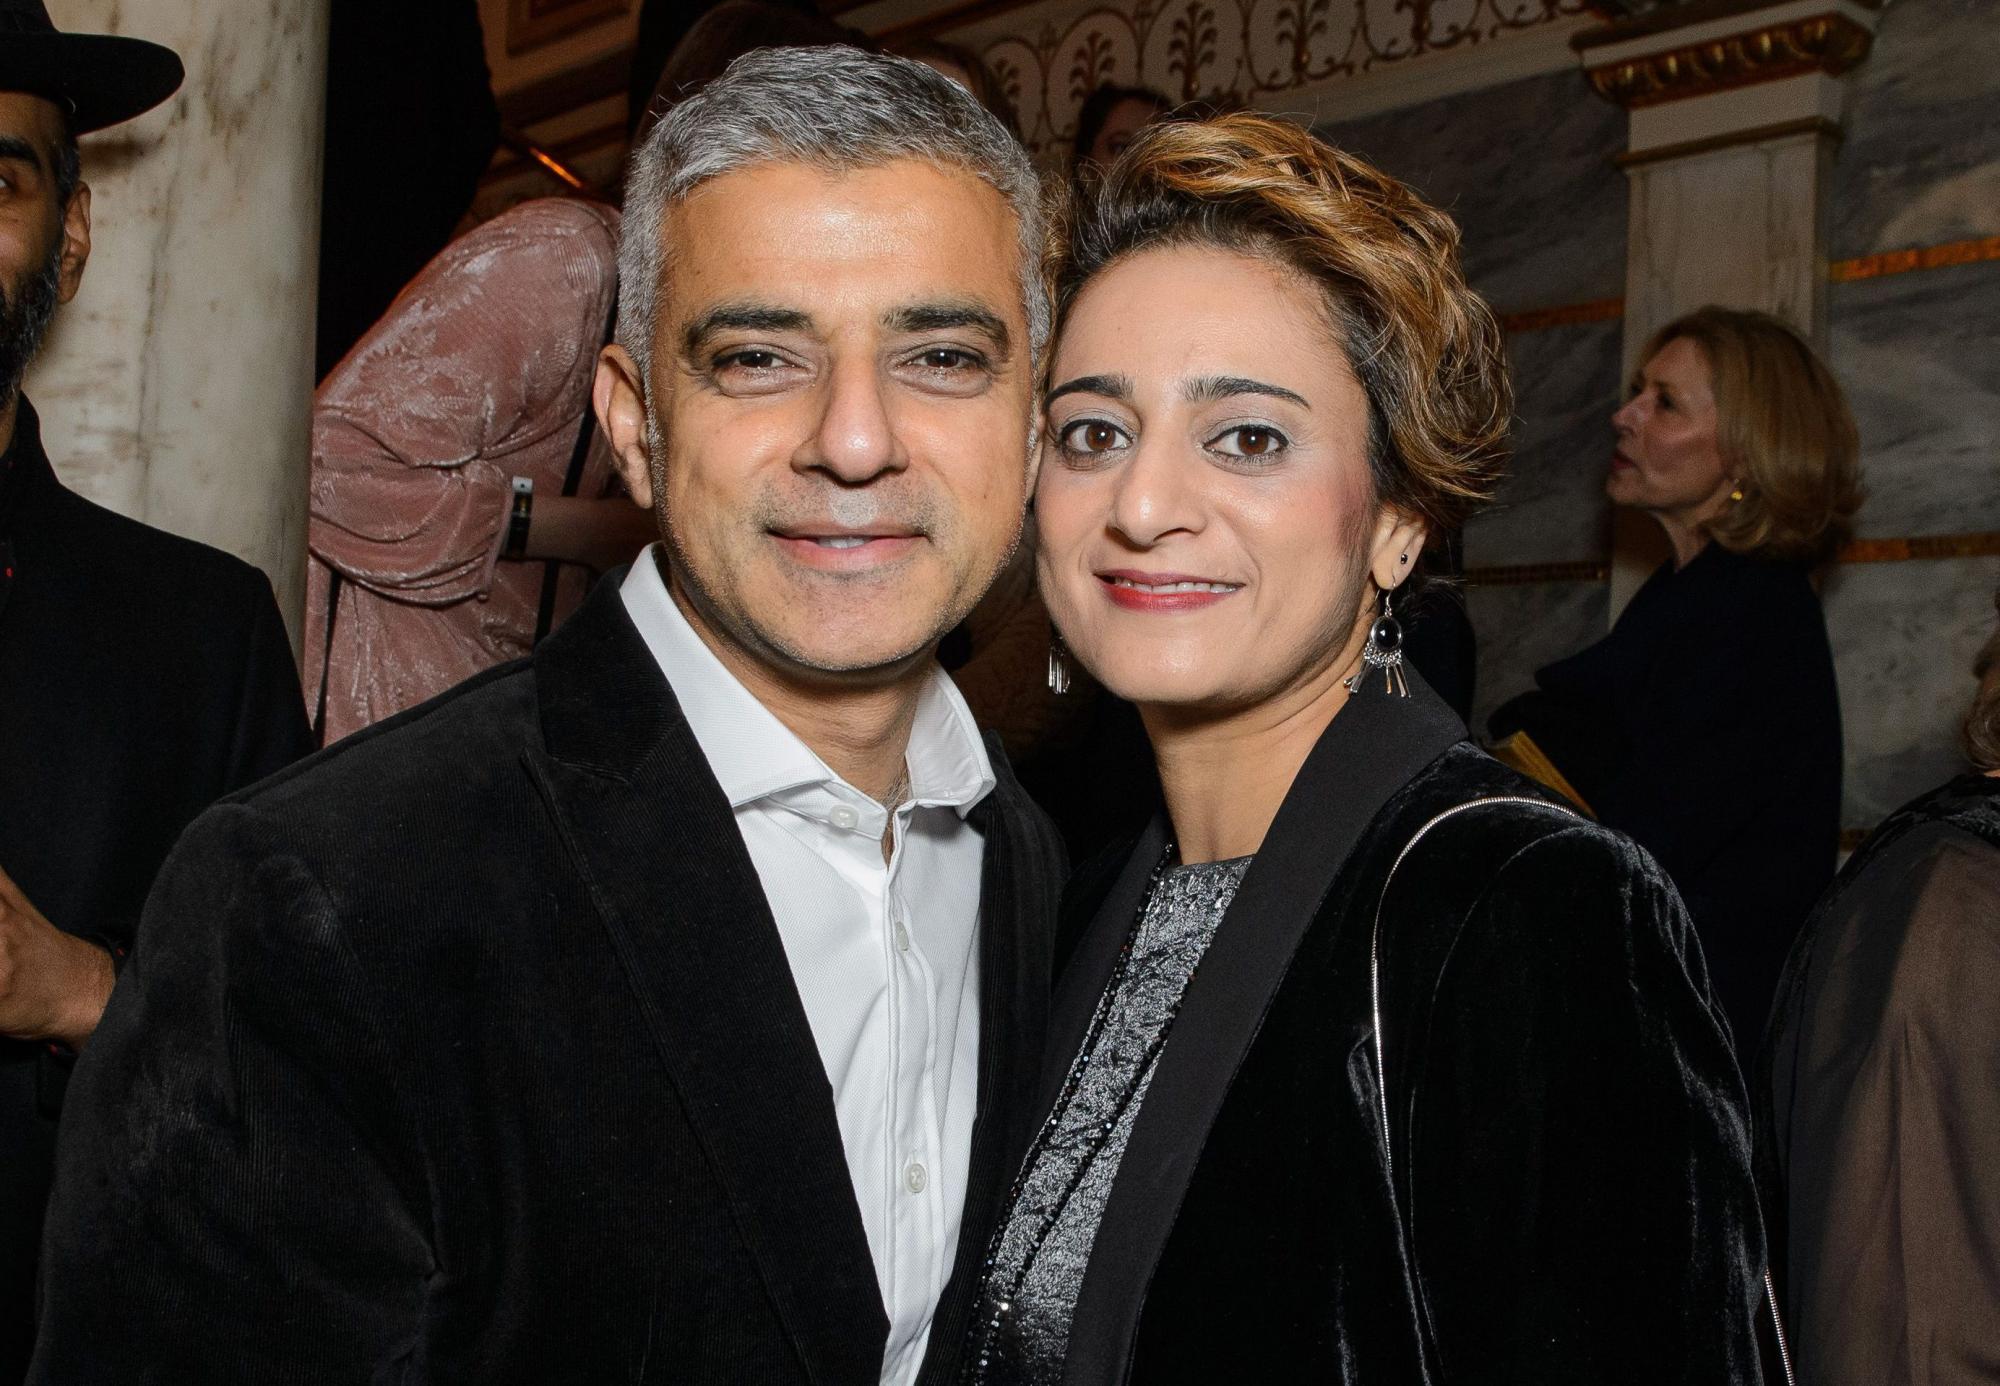 Sadiq Khan is the Member of Parliament for Tooting